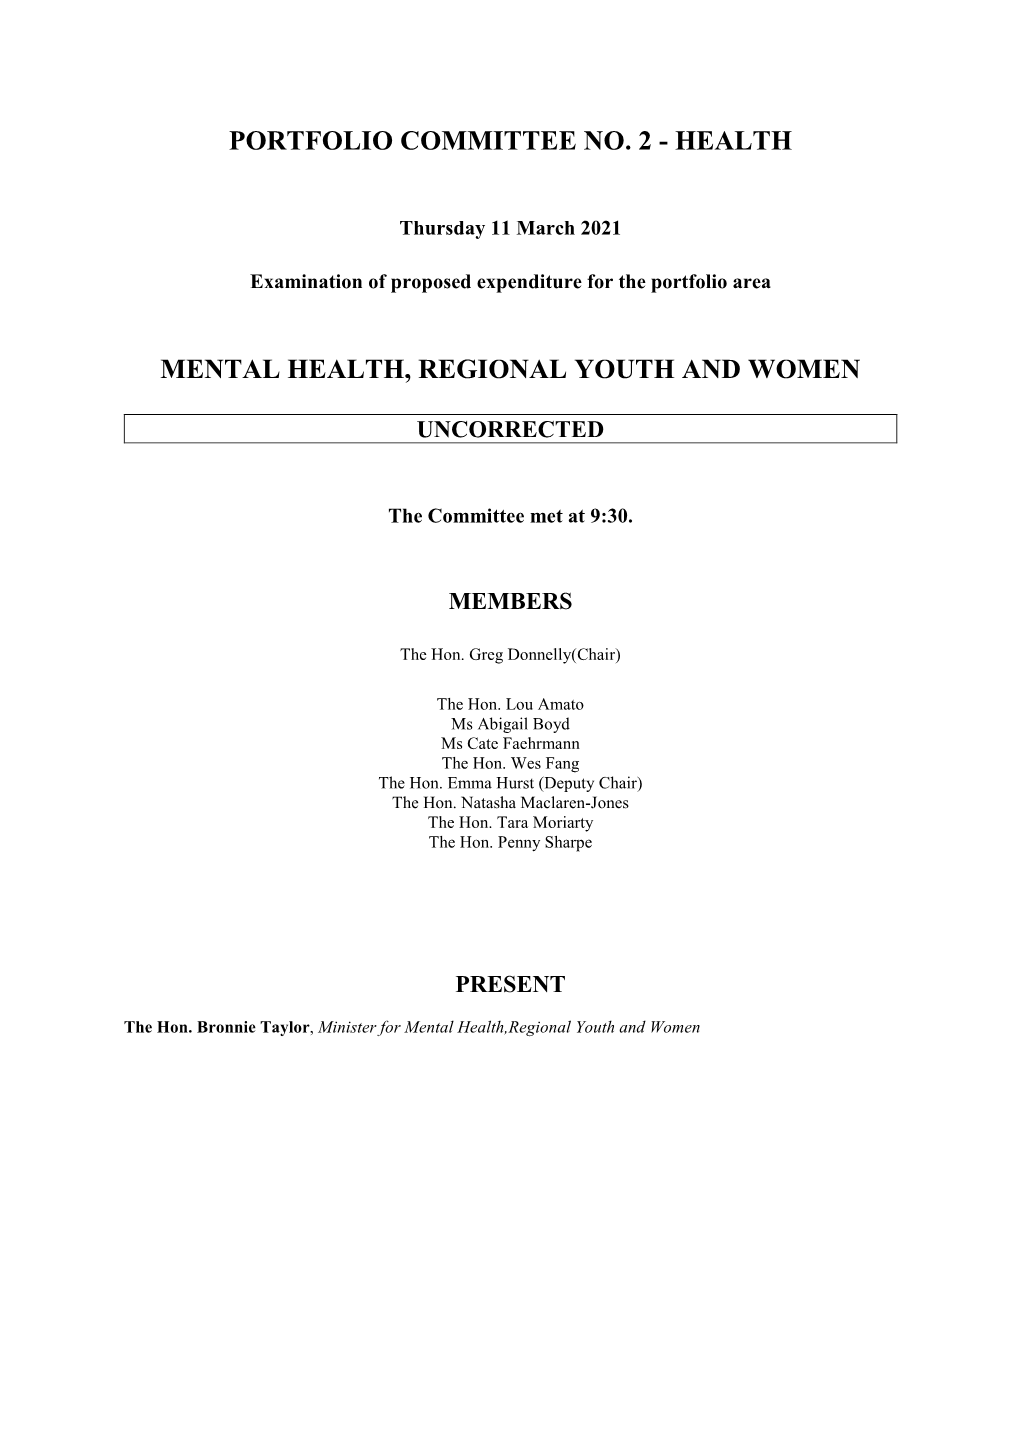 Mental Health, Regional Youth and Women